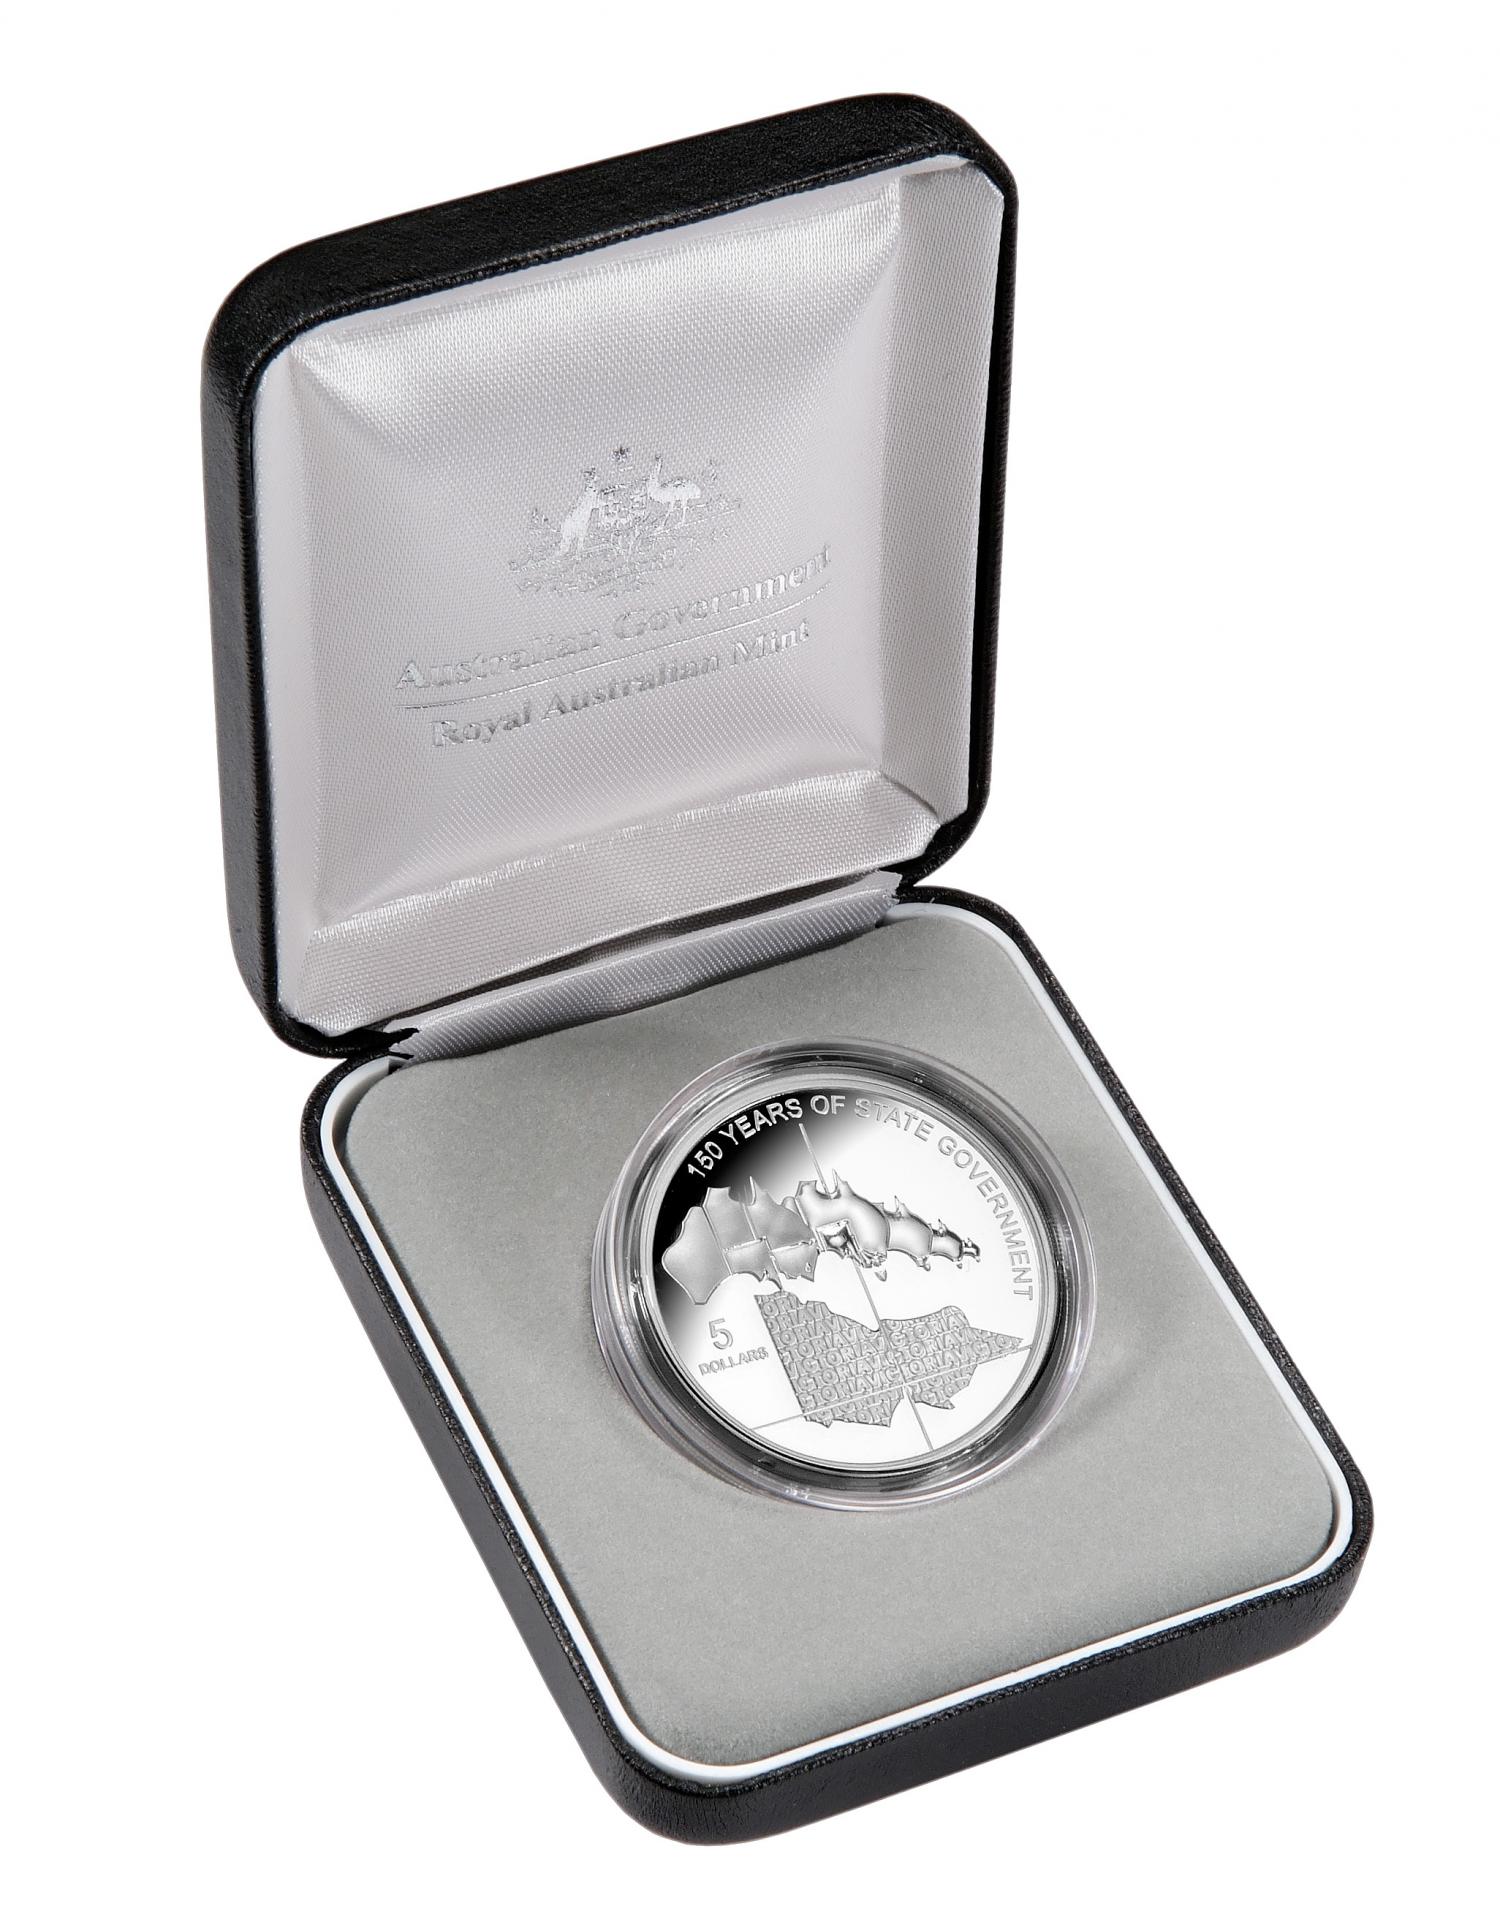 Thumbnail for 2006 $5.00 Silver Proof Victoria 150 Years of State Government